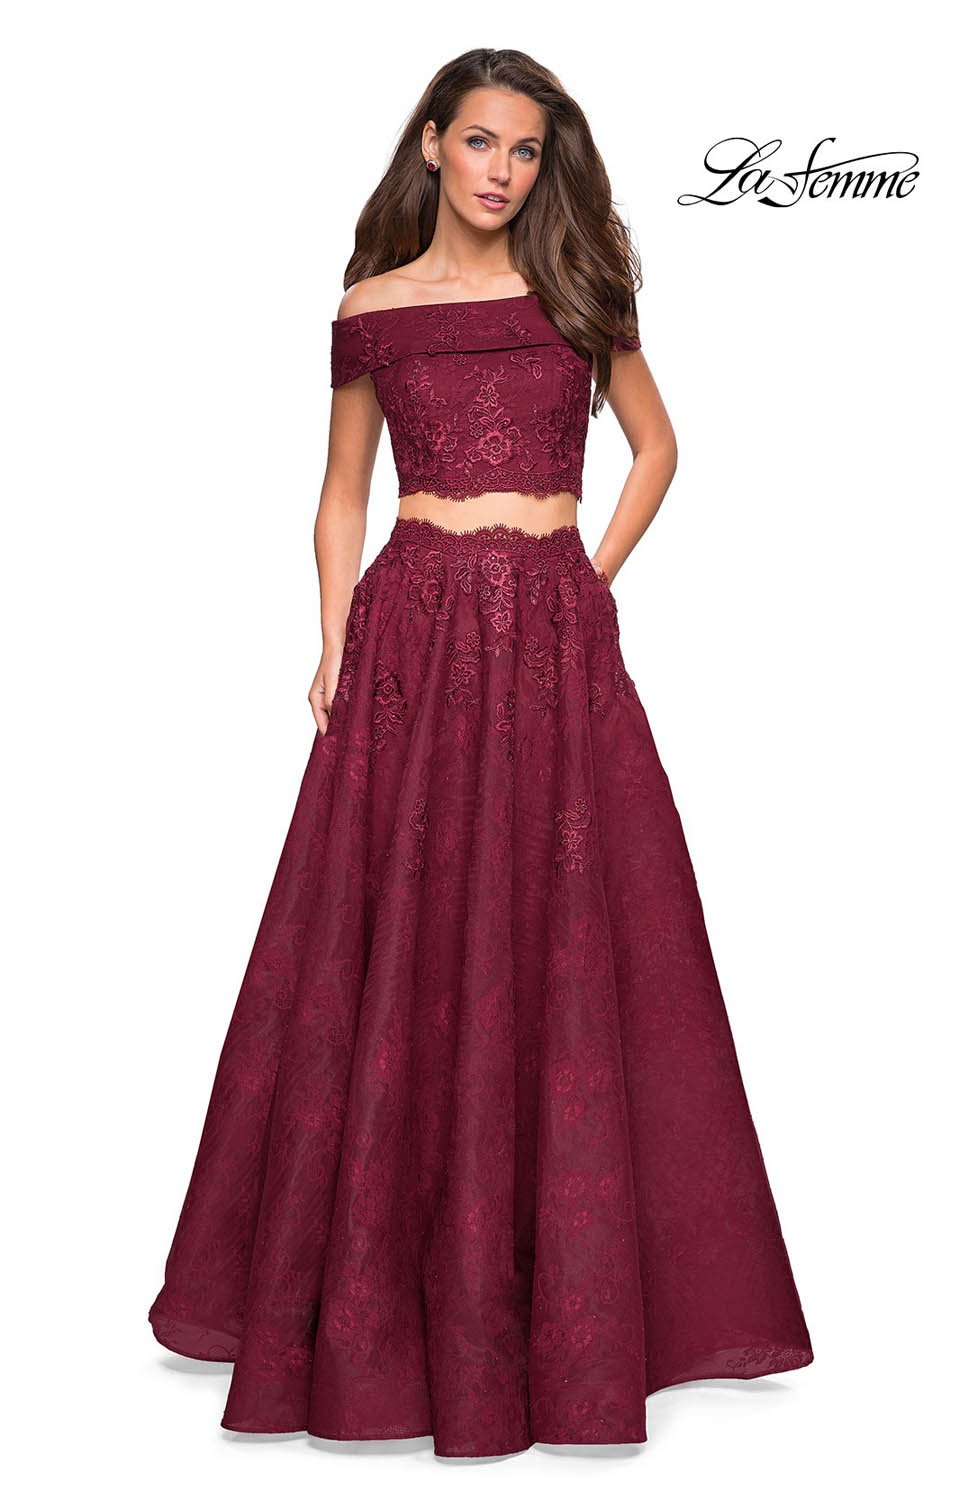 La Femme 27028 dress images in these colors: Burgundy, Navy, White Nude.